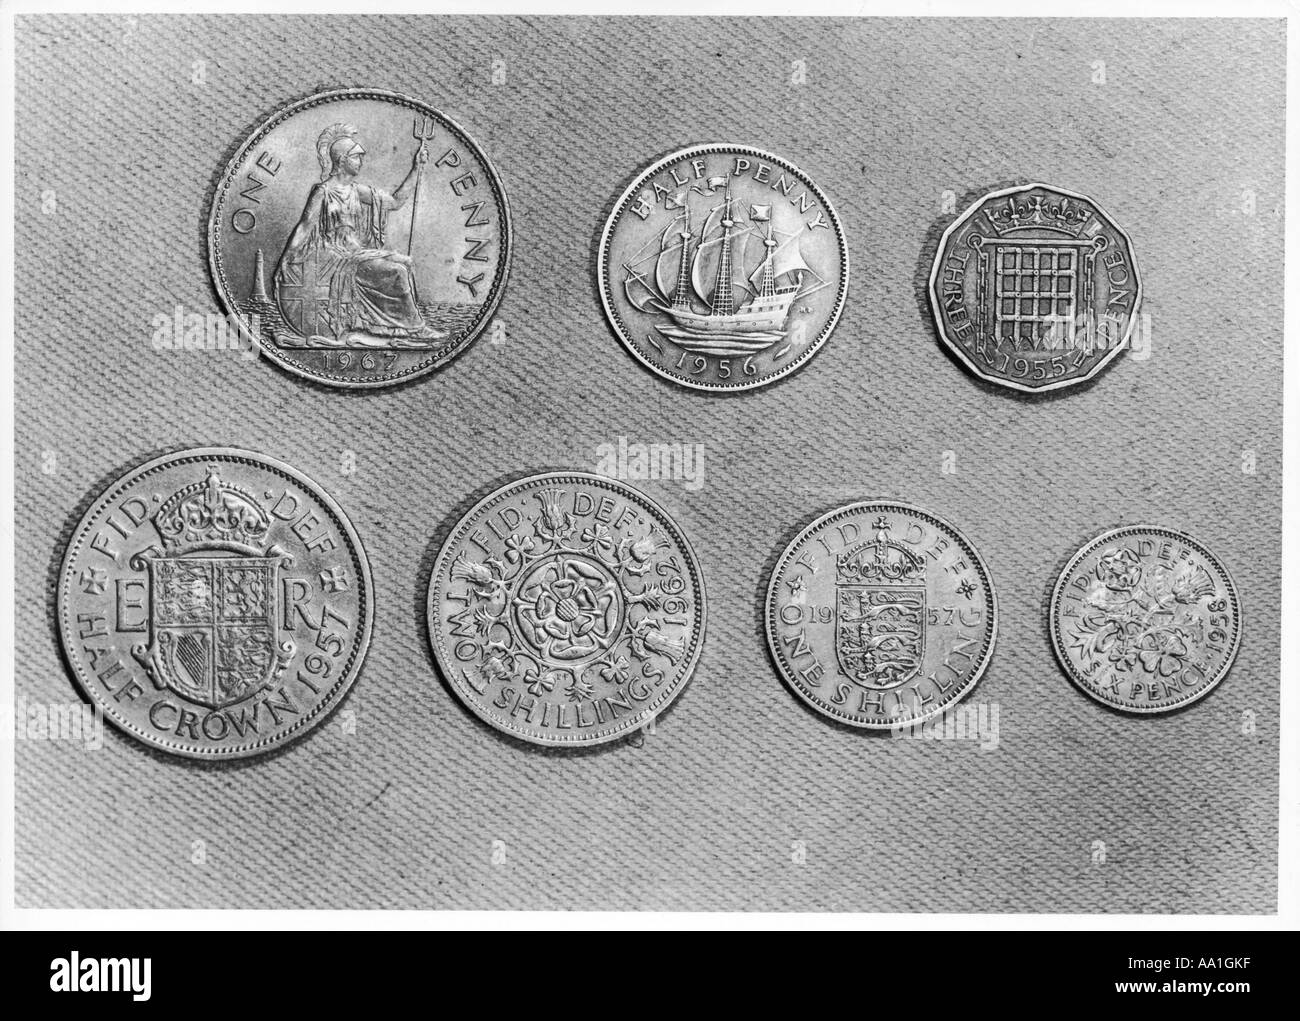 Old English Coins Banque D'Images